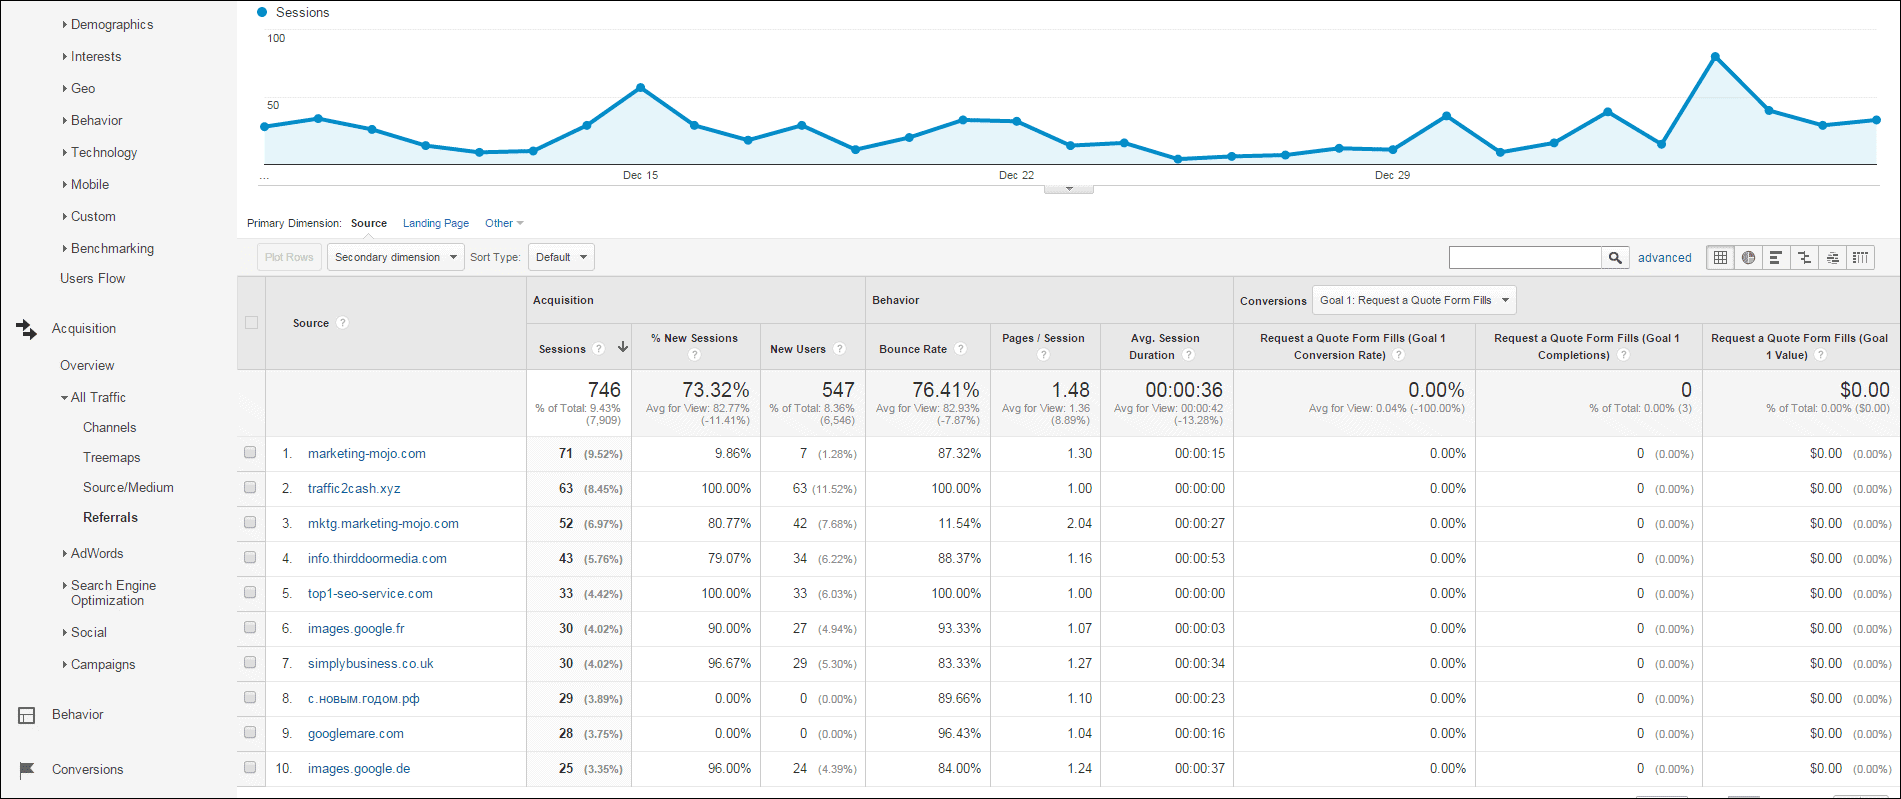 A look at the Referals for all traffic in Google Analytics